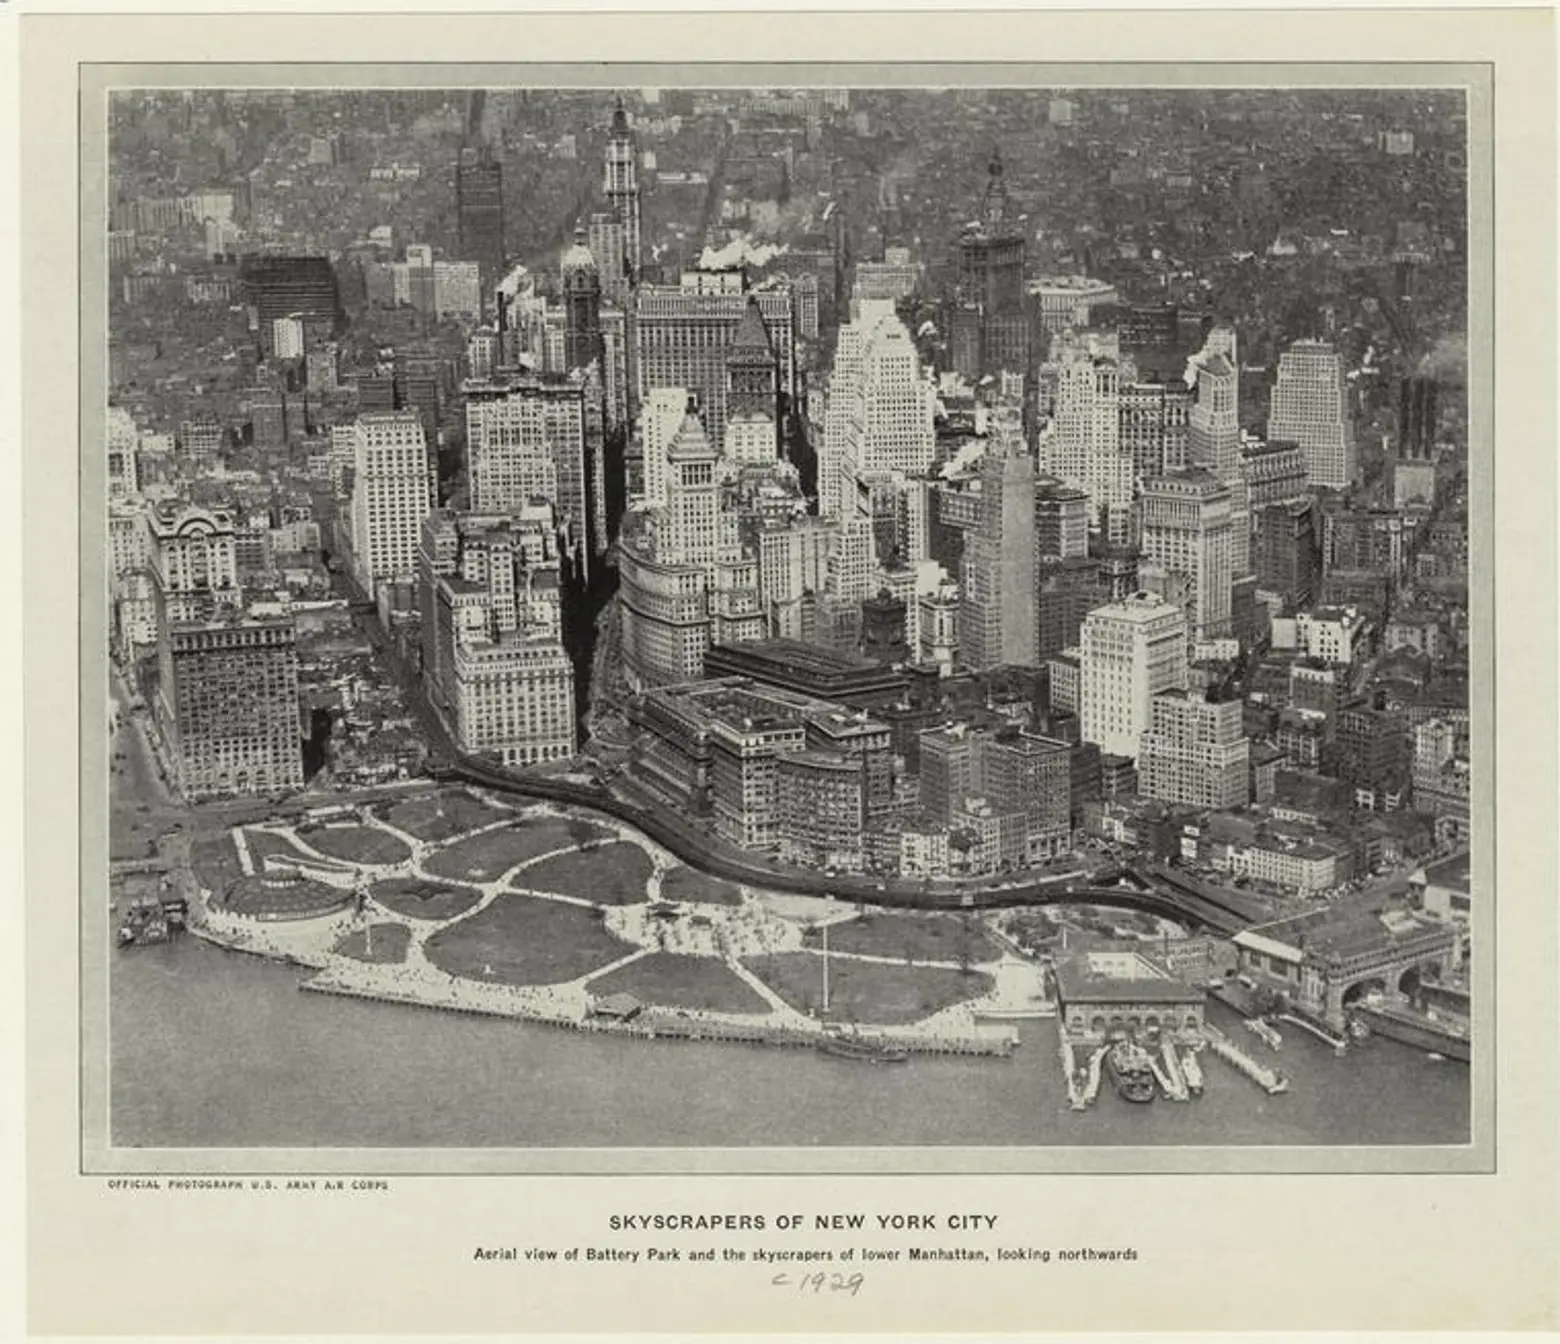 A view of Lower Manhattan from 1910.